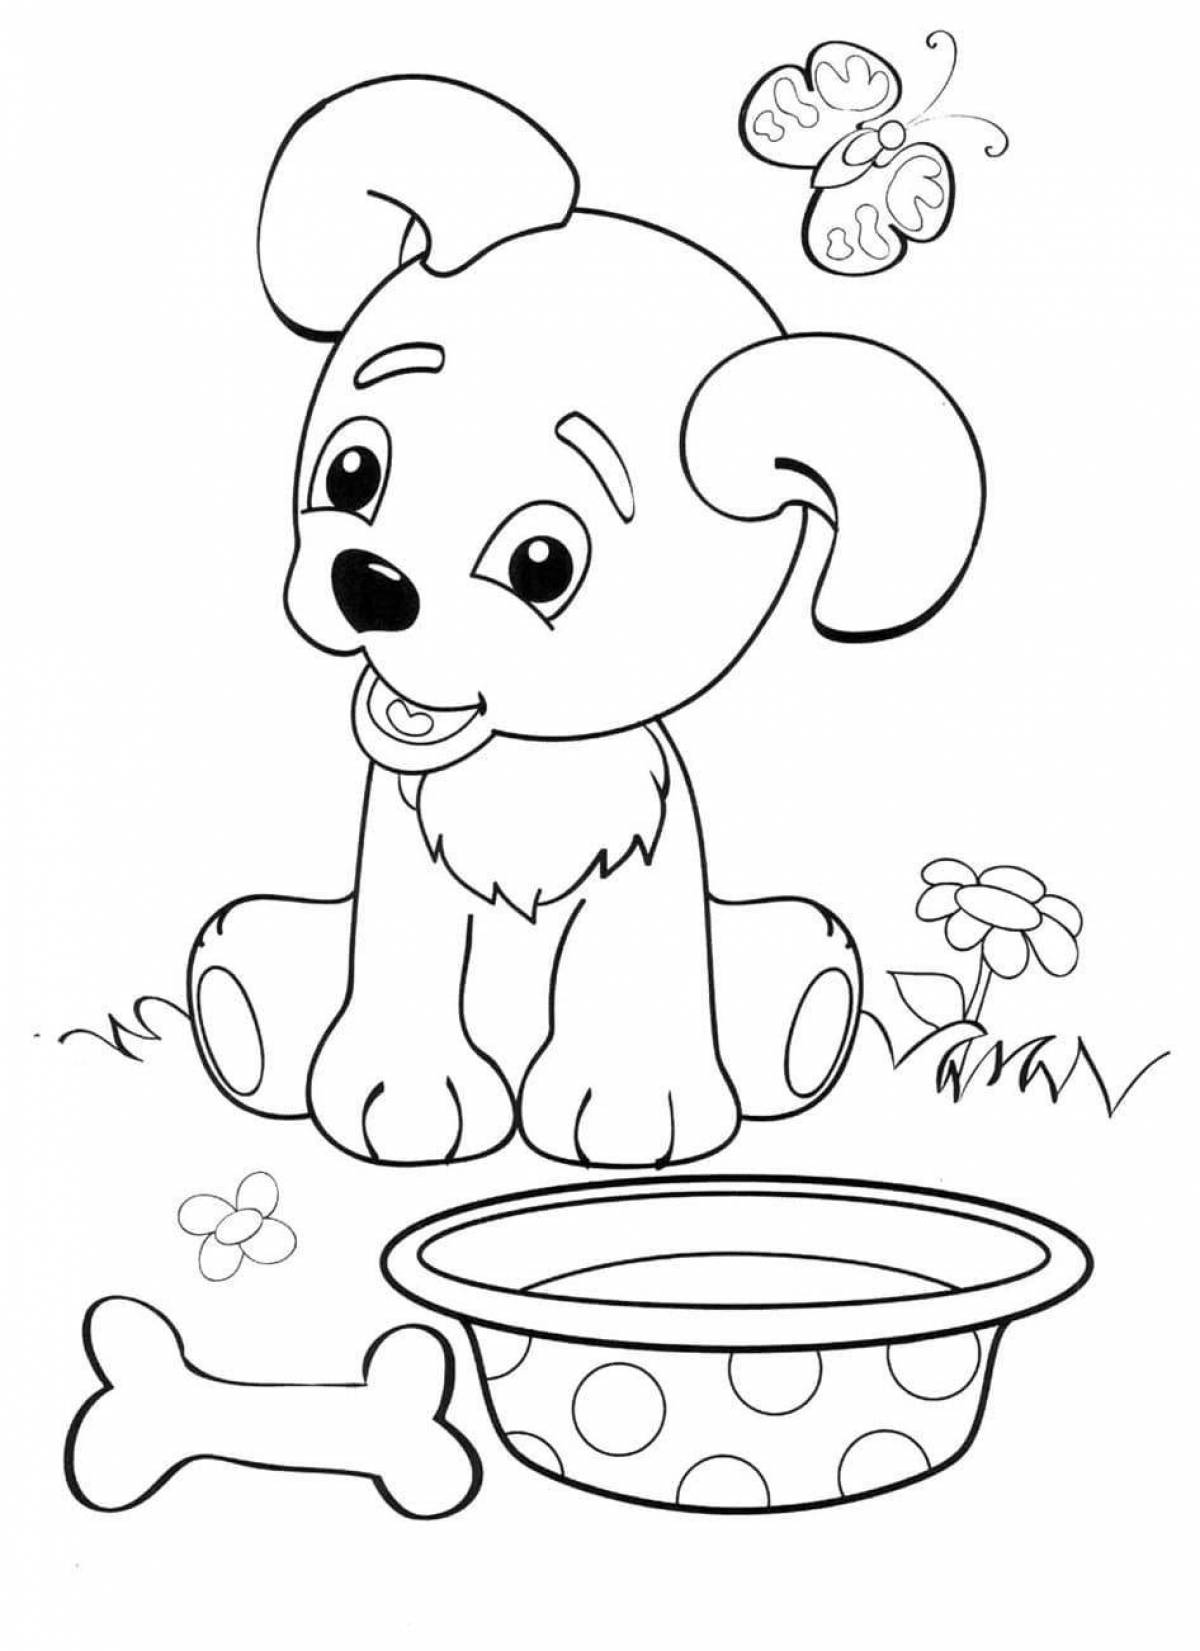 Coloring page adorable dog